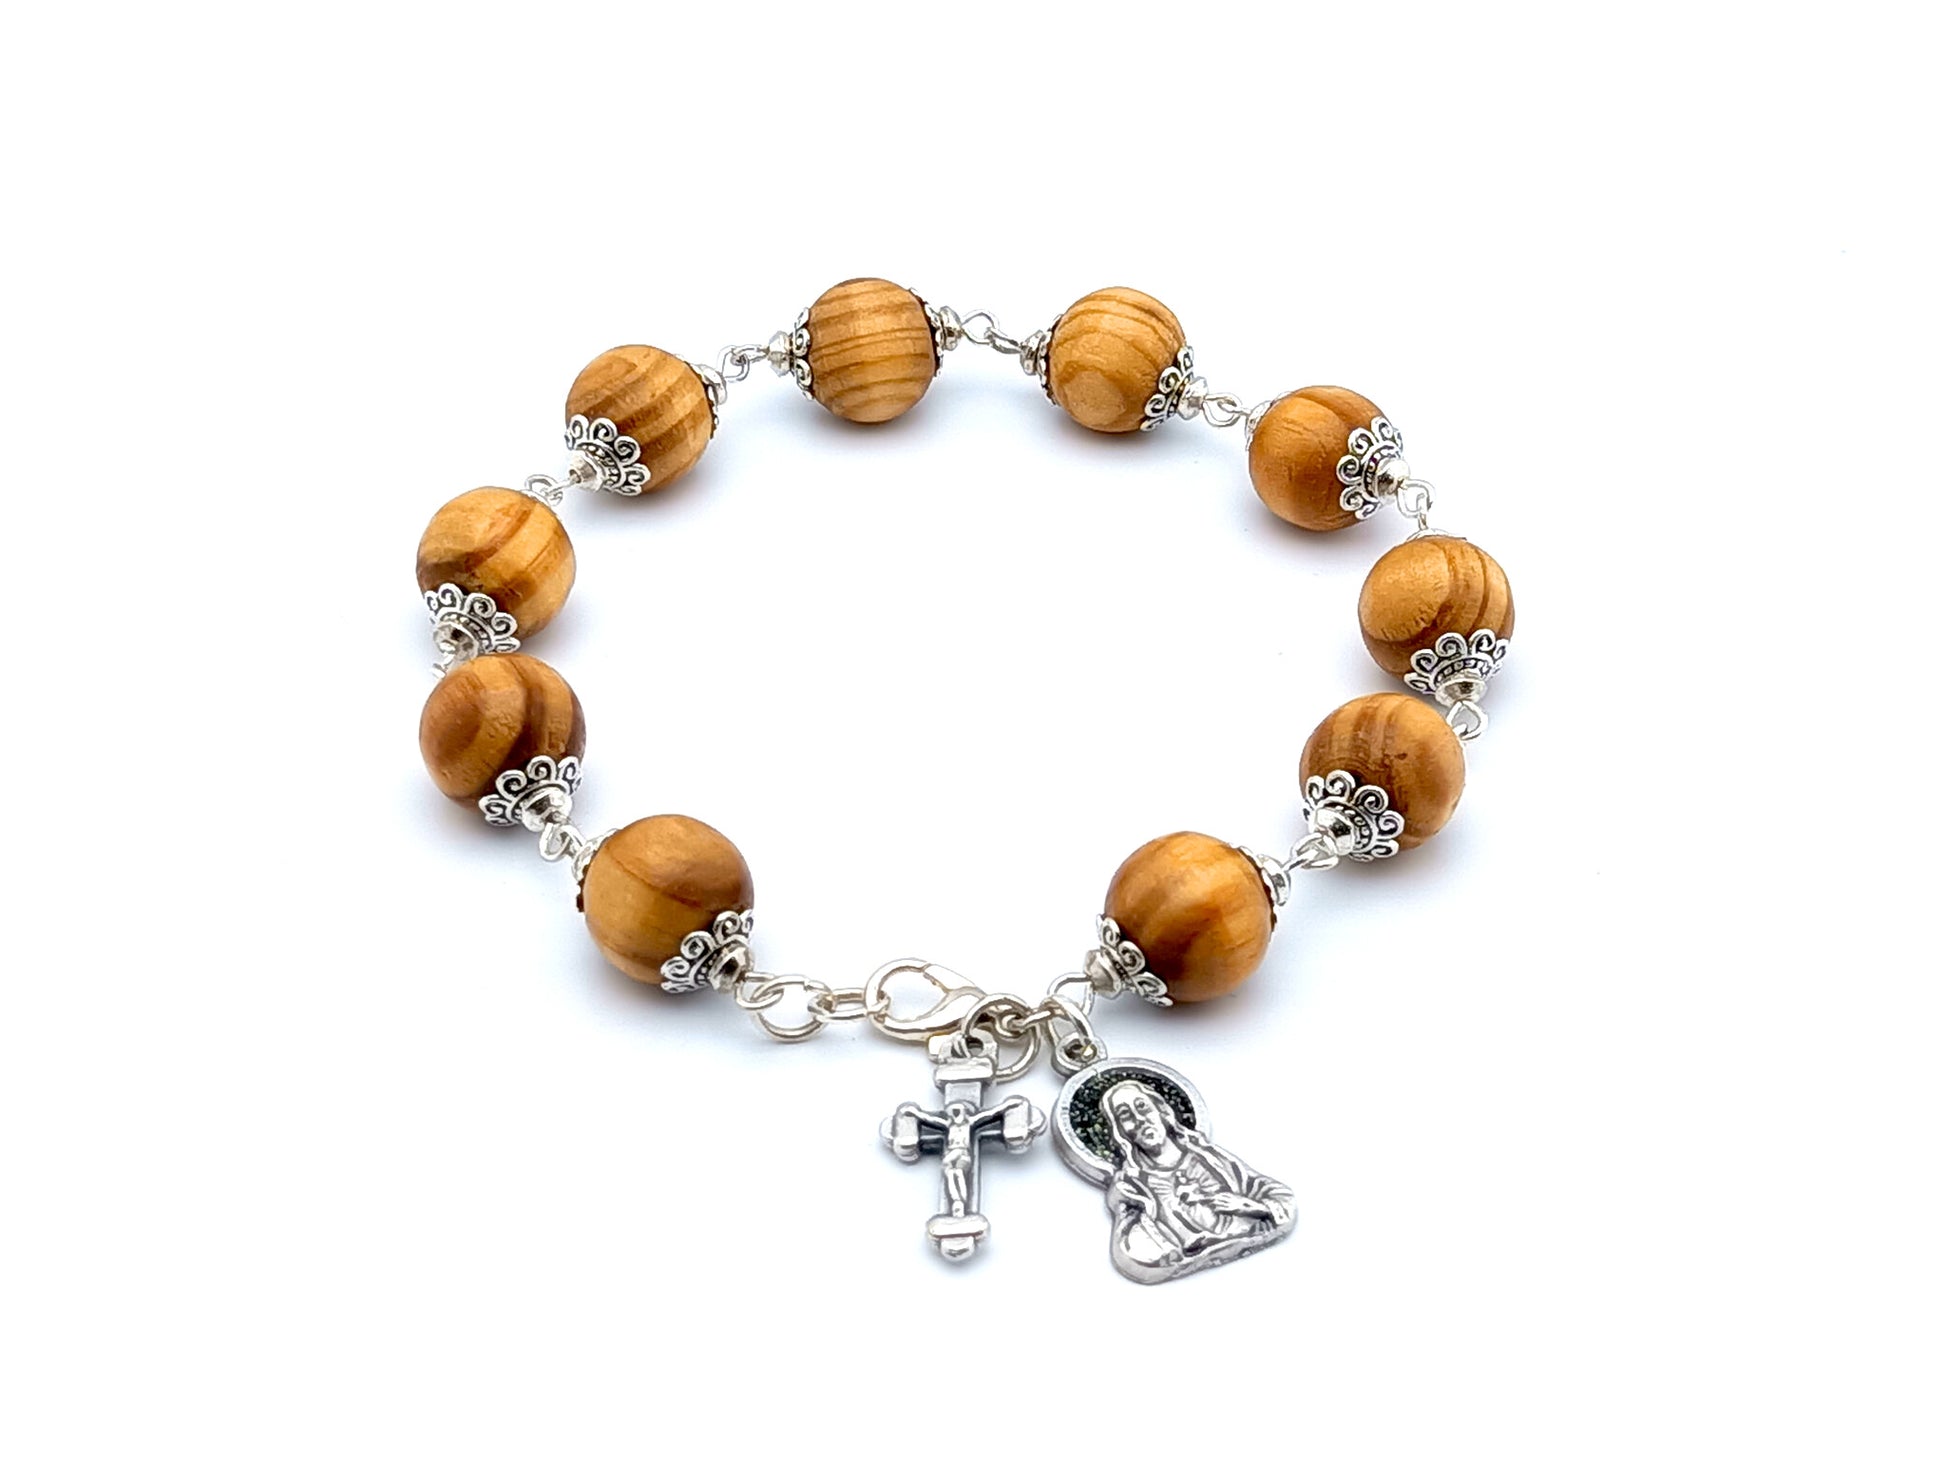 Sacred Heart unique rosary beads single decade rosary bracelet with wooden beads, silver crucifix medal and clasp.